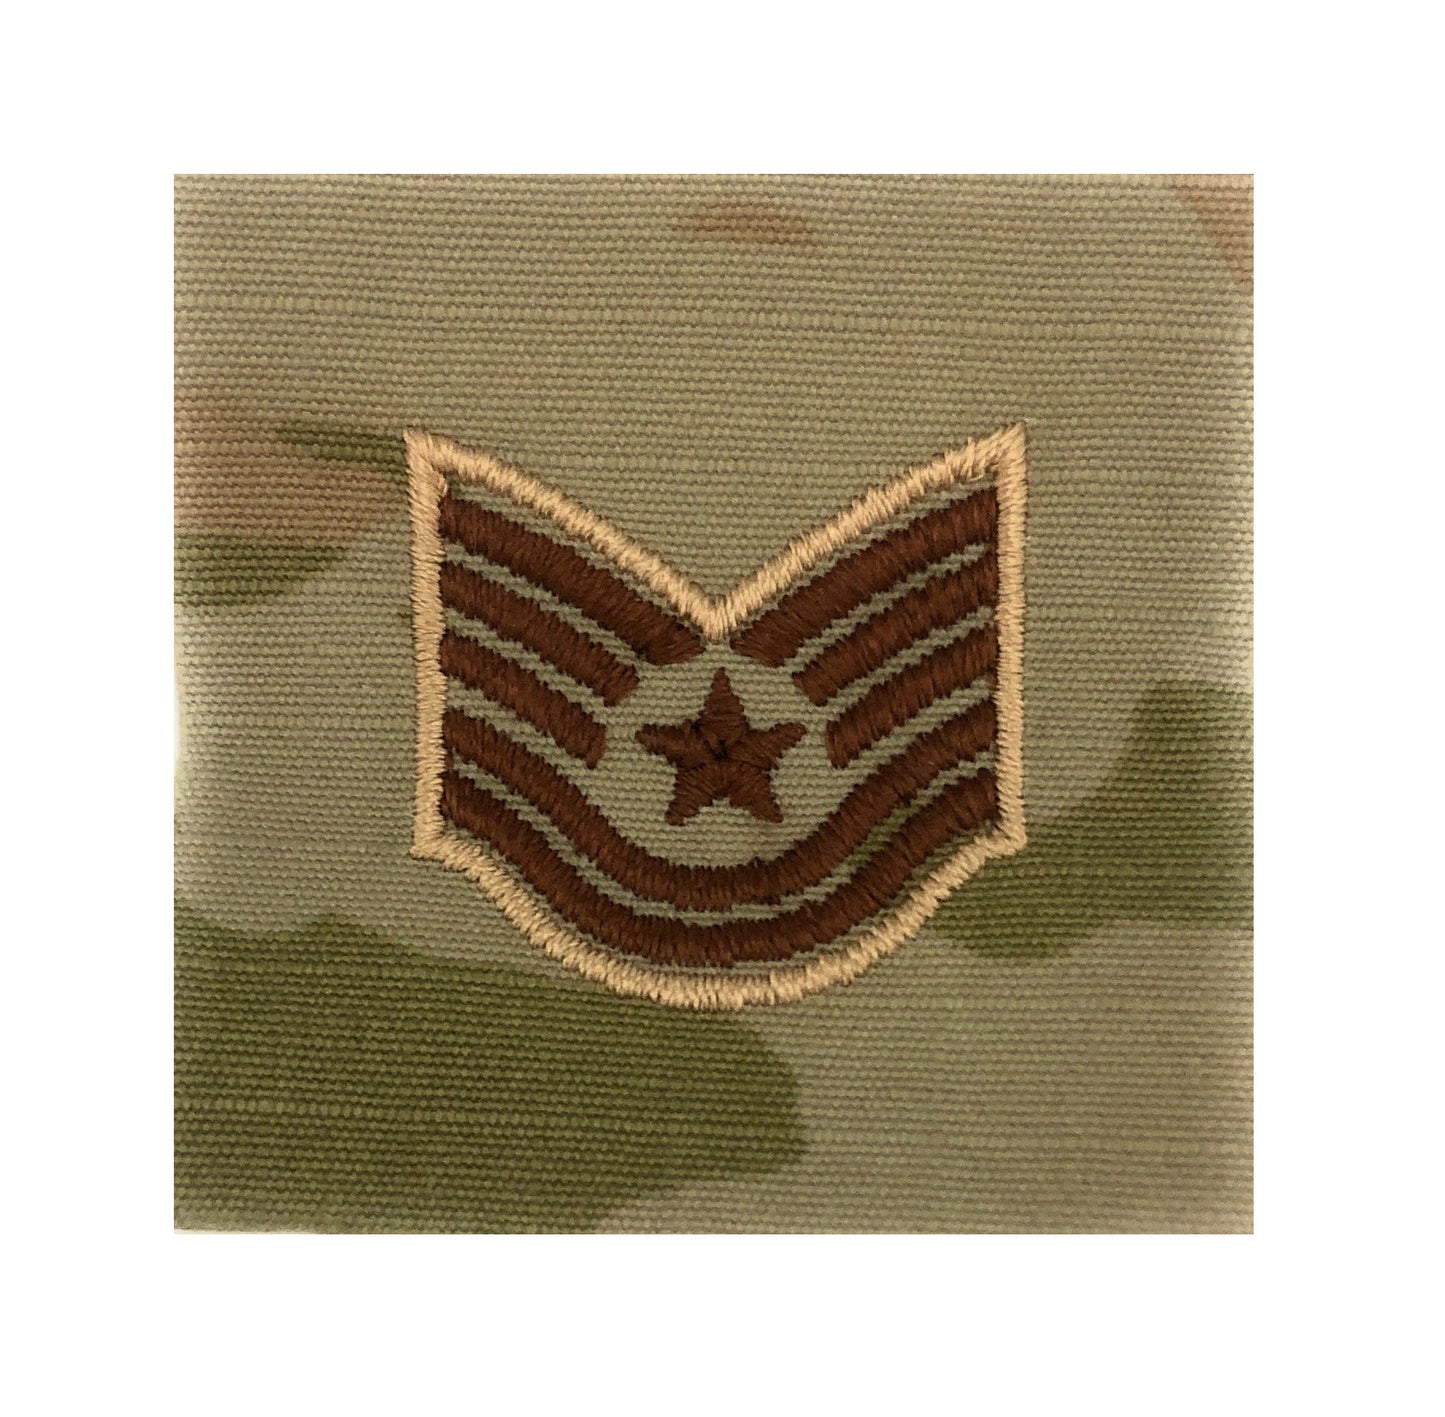 U.S. Air Force E6 Technical Sergeant OCP Spice Brown Sew-On Rank For Shirt,Jacket,Coat